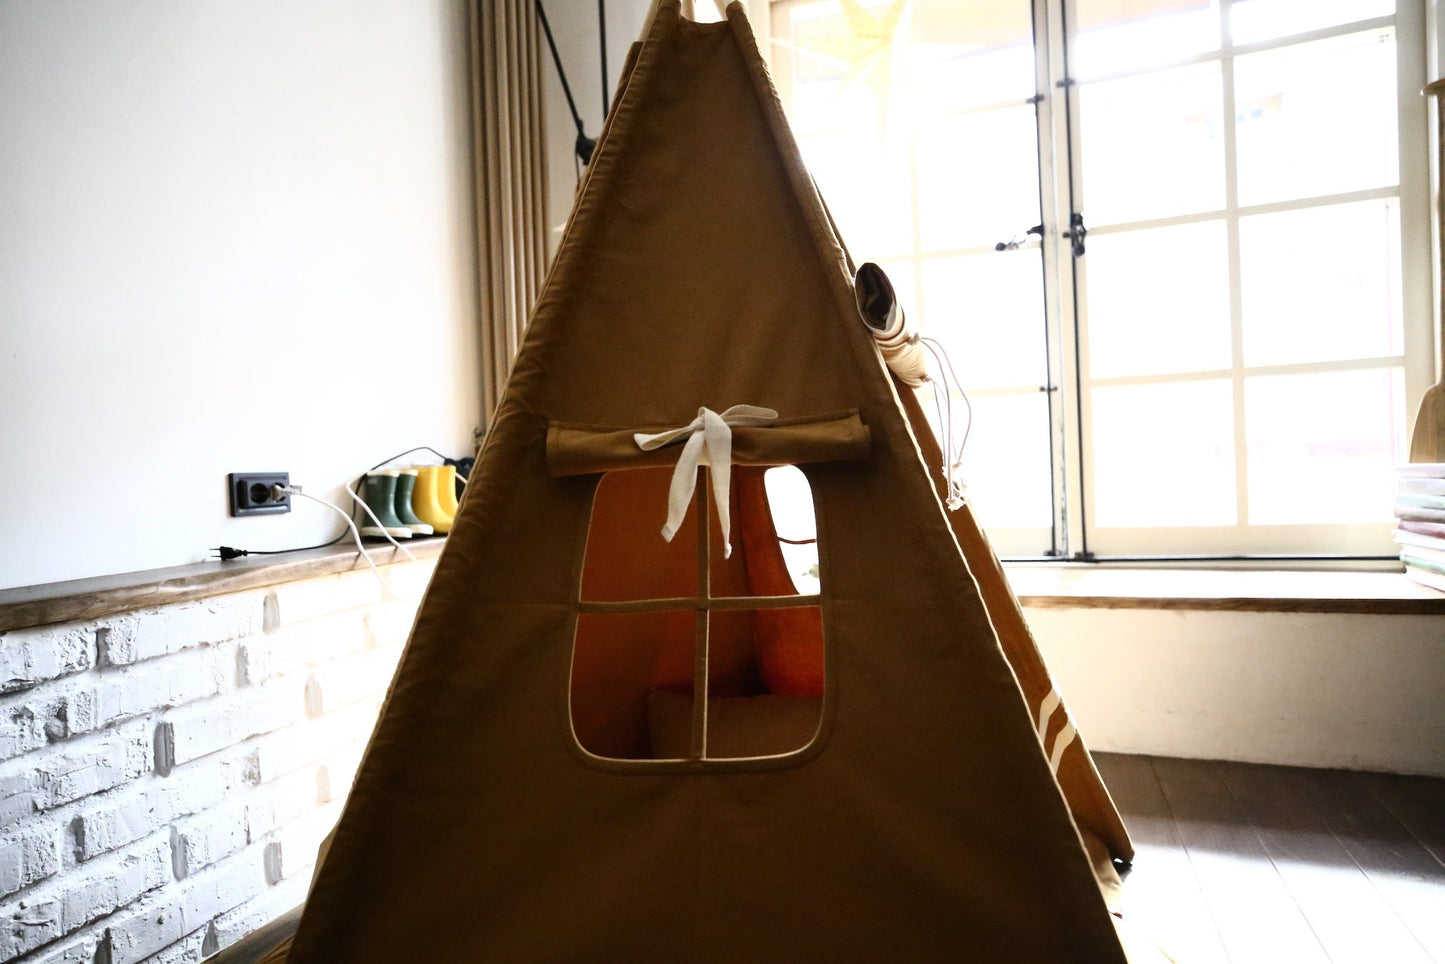 Childrens Indoor Playhouse | Army Tent | Indian Tipi Tent | Boys Play Houses | Native Teepee | Childrens Indoor Teepee - Christmas gift